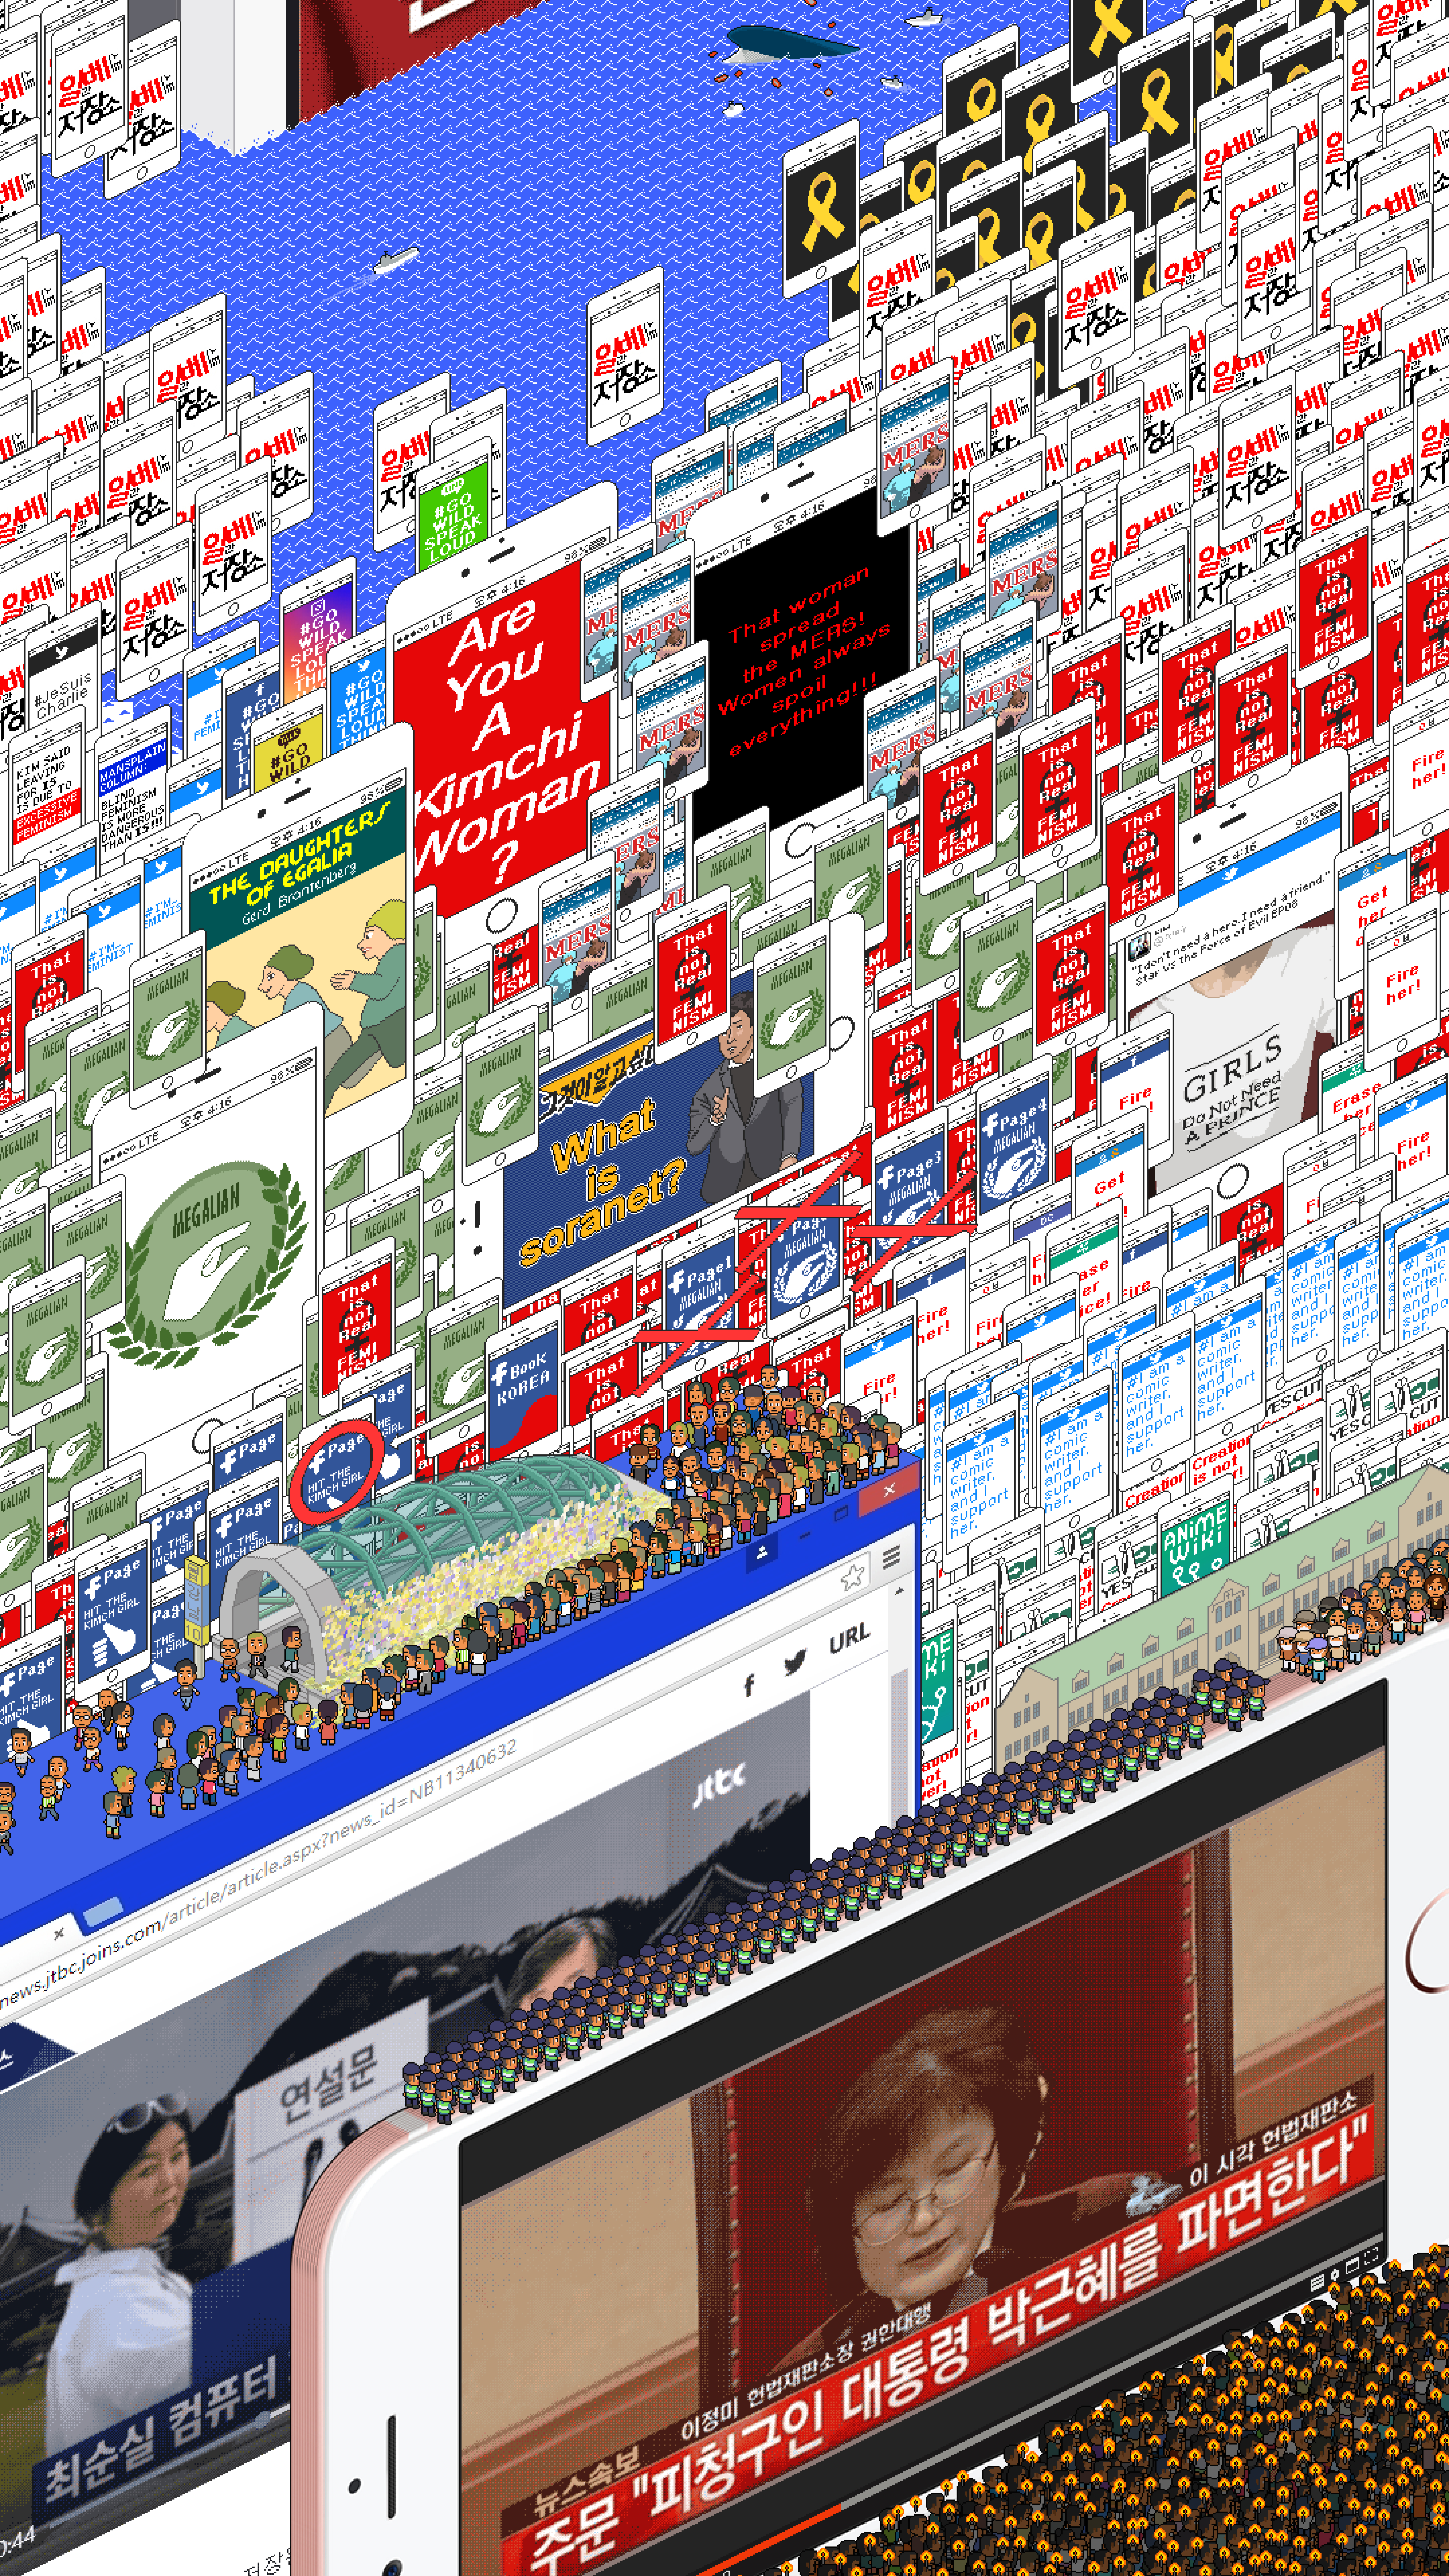 Digital illustration of layers of mobile phone screens and Windows XP pop-up windows.